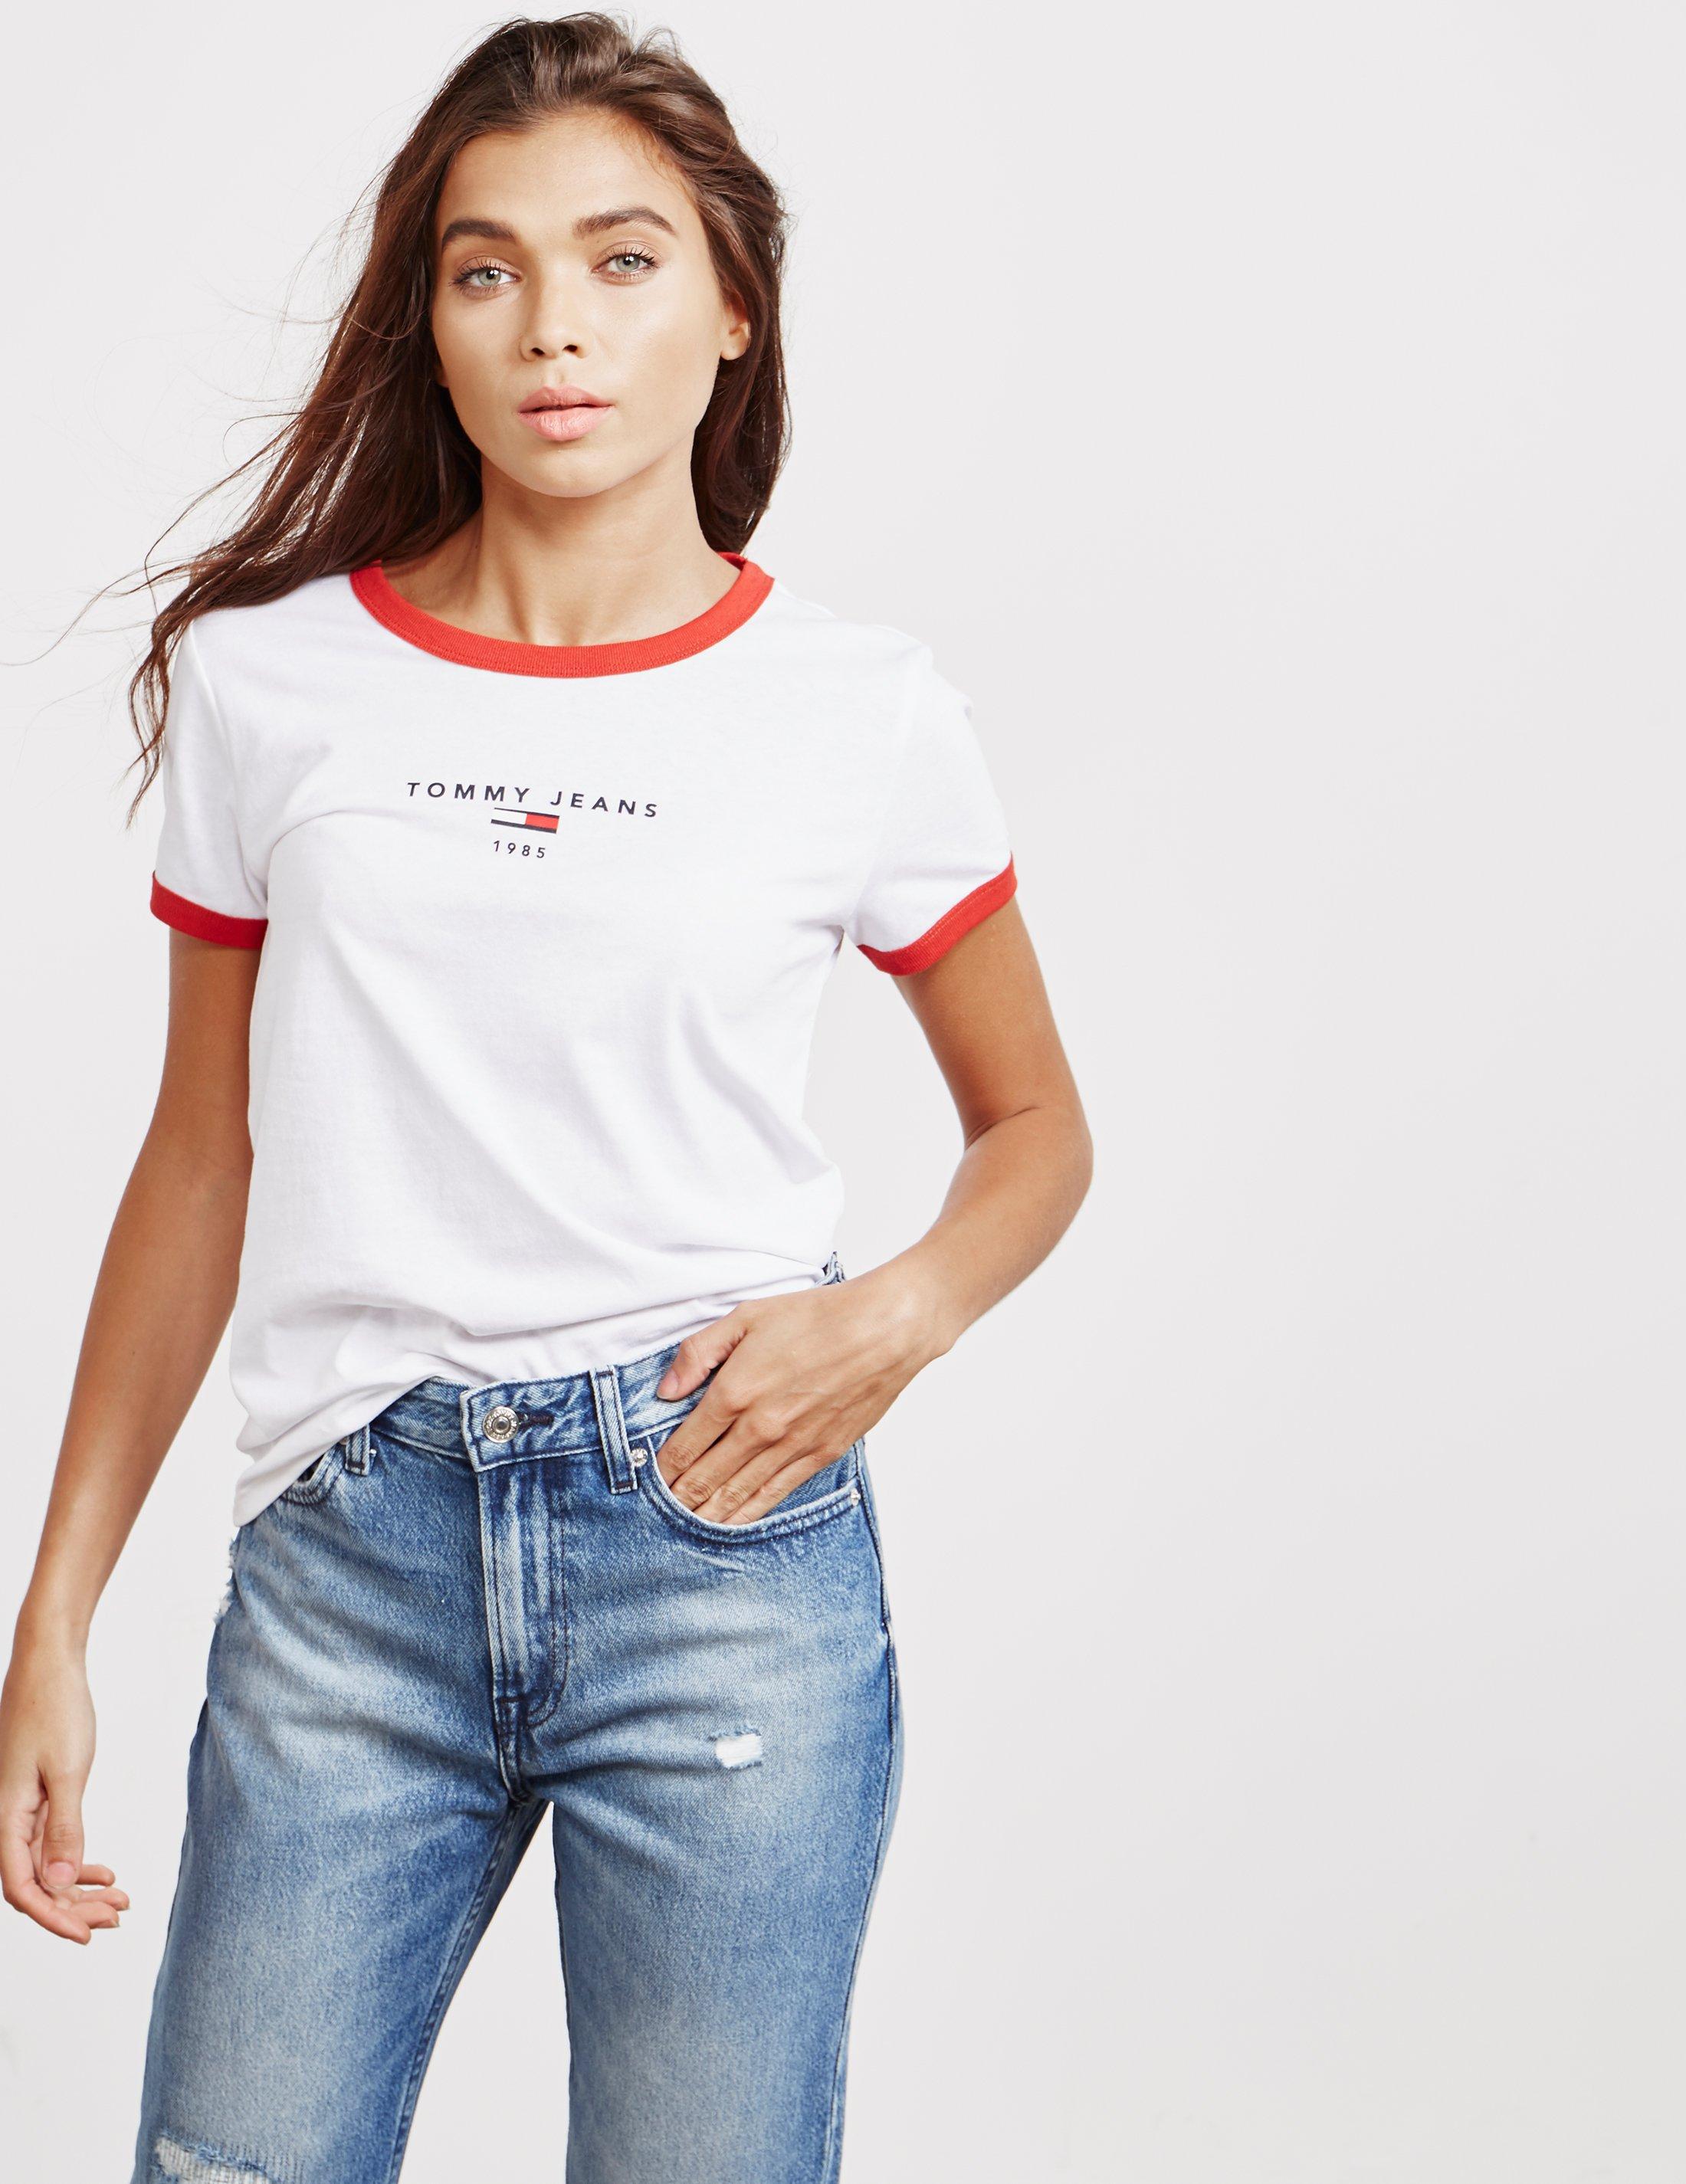 tommy hilfiger shirts for ladies